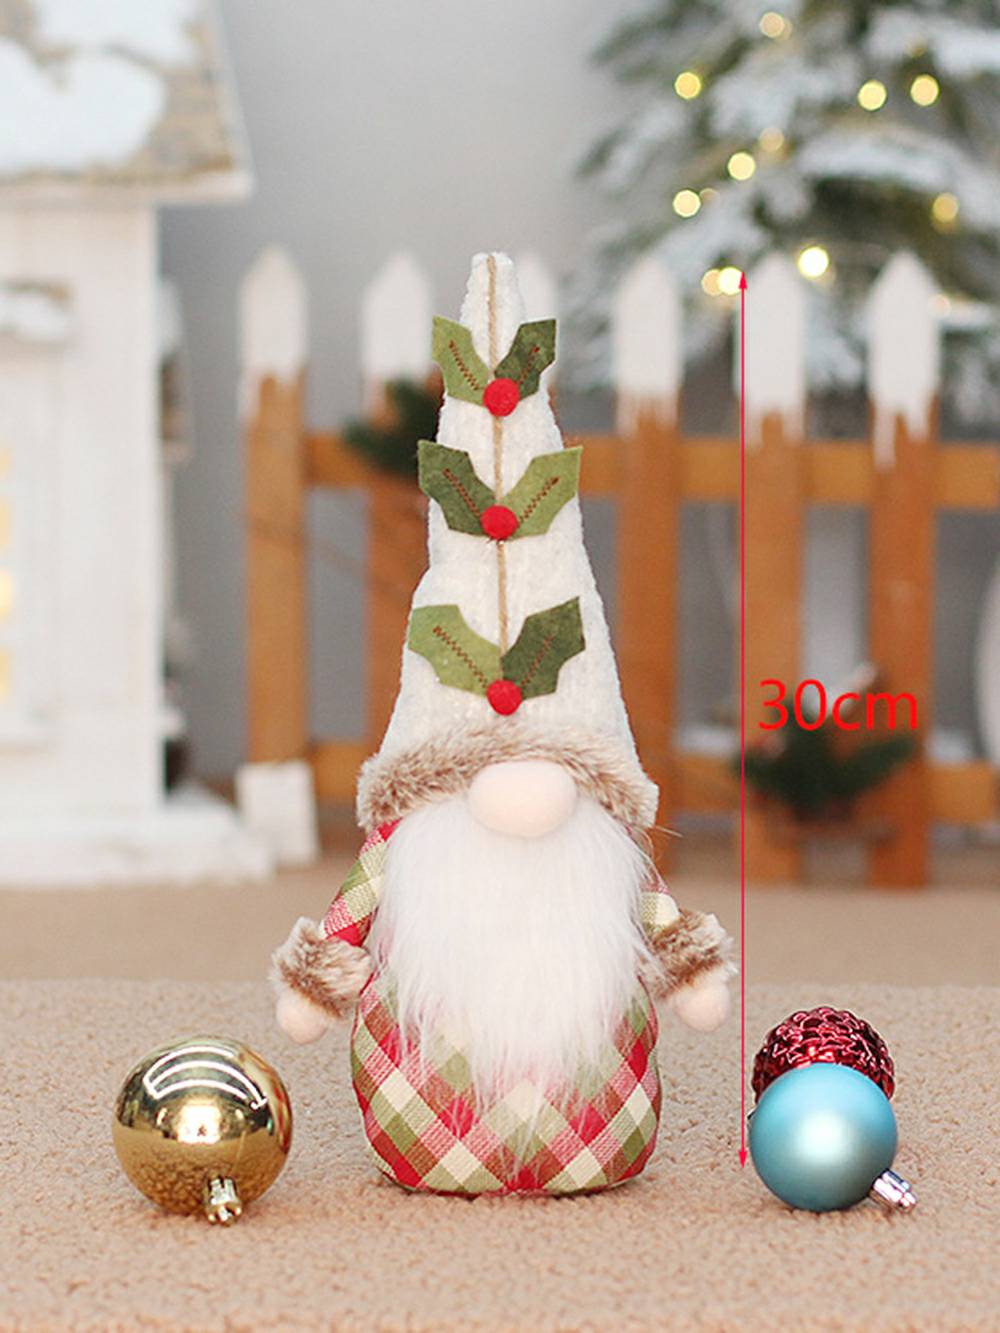 Red Plaid Christmas Tree Gnome Plush Dolls with Sitting and Standing Poses